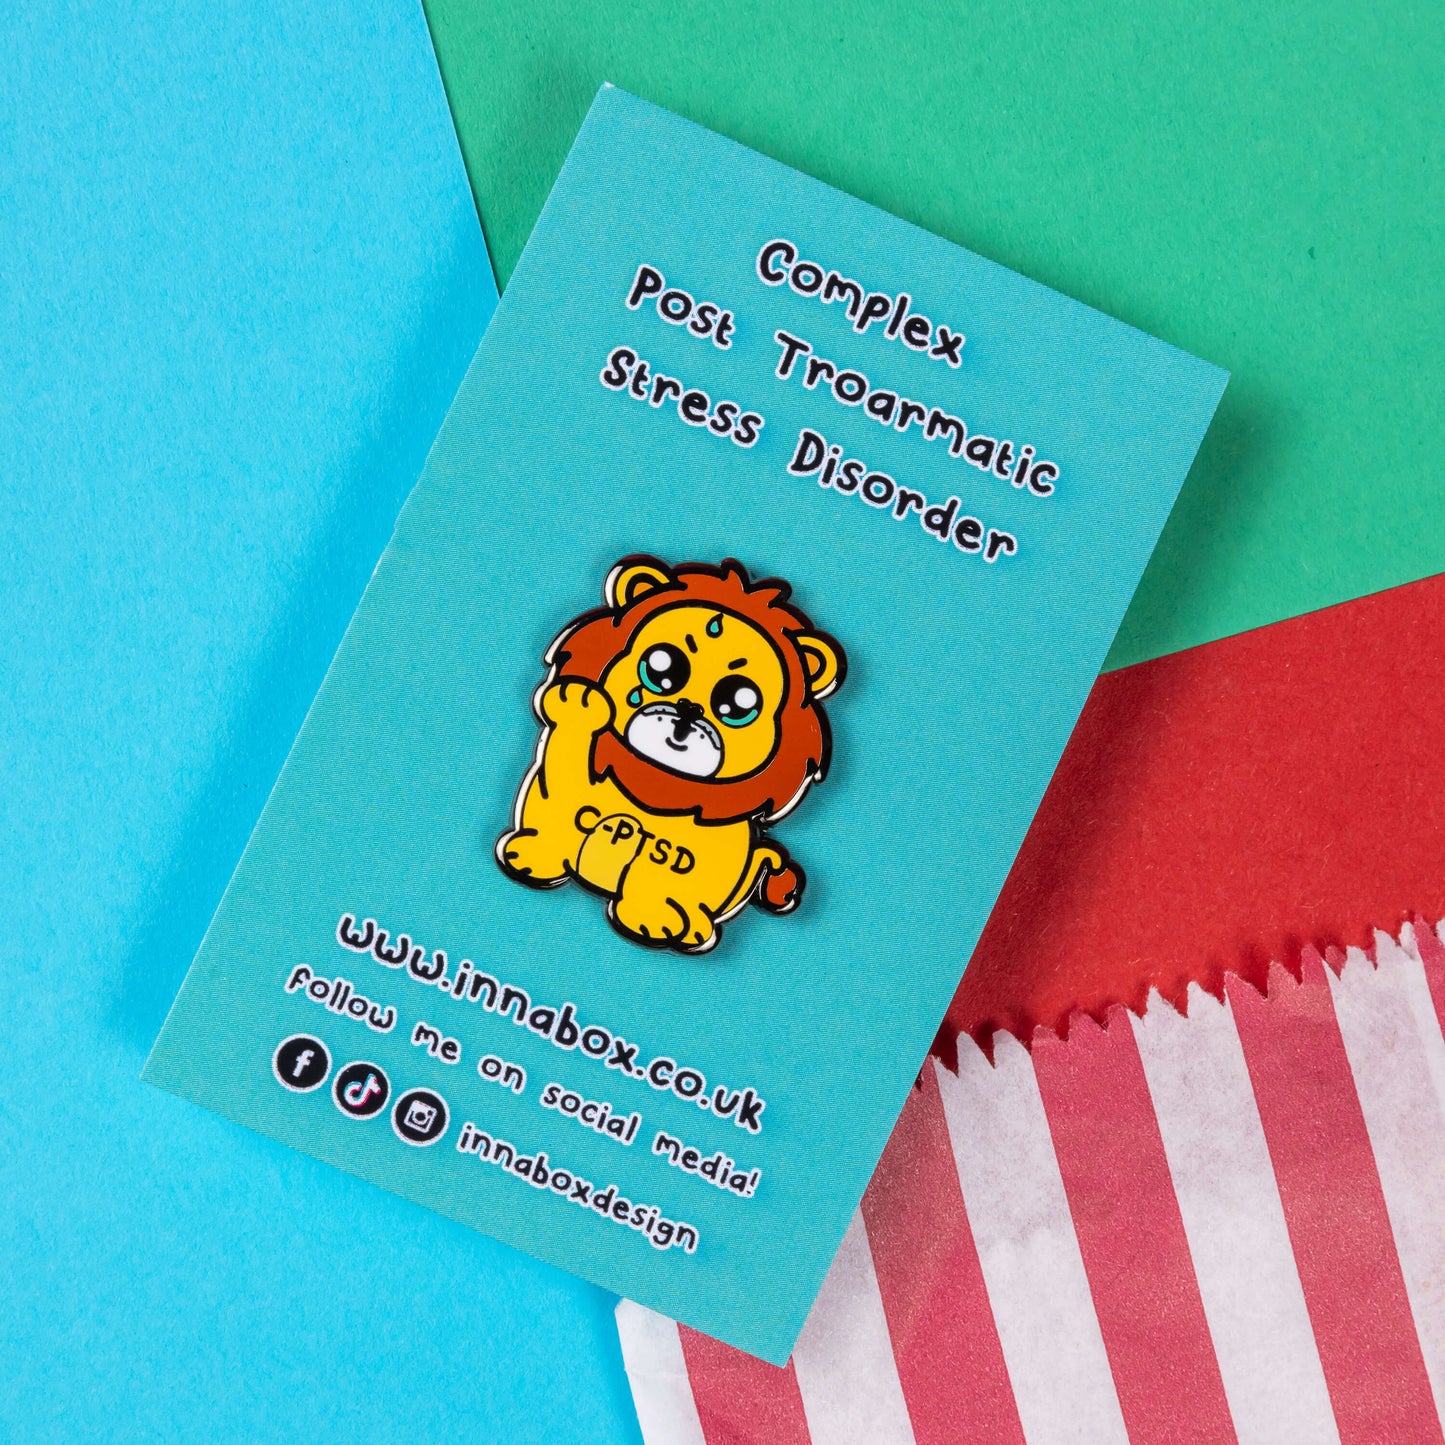 The Complex Post Troarmatic Stress Disorder Lion Enamel Pin - C-PTSD - Complex Post Traumatic Stress Disorder on blue backing card with black text. A yellow crying smiling and sweating male lion with its paw raised in the middle with 'C-PTSD' across its chest. The enamel pin design is raising awareness for complex post traumatic stress disorder.